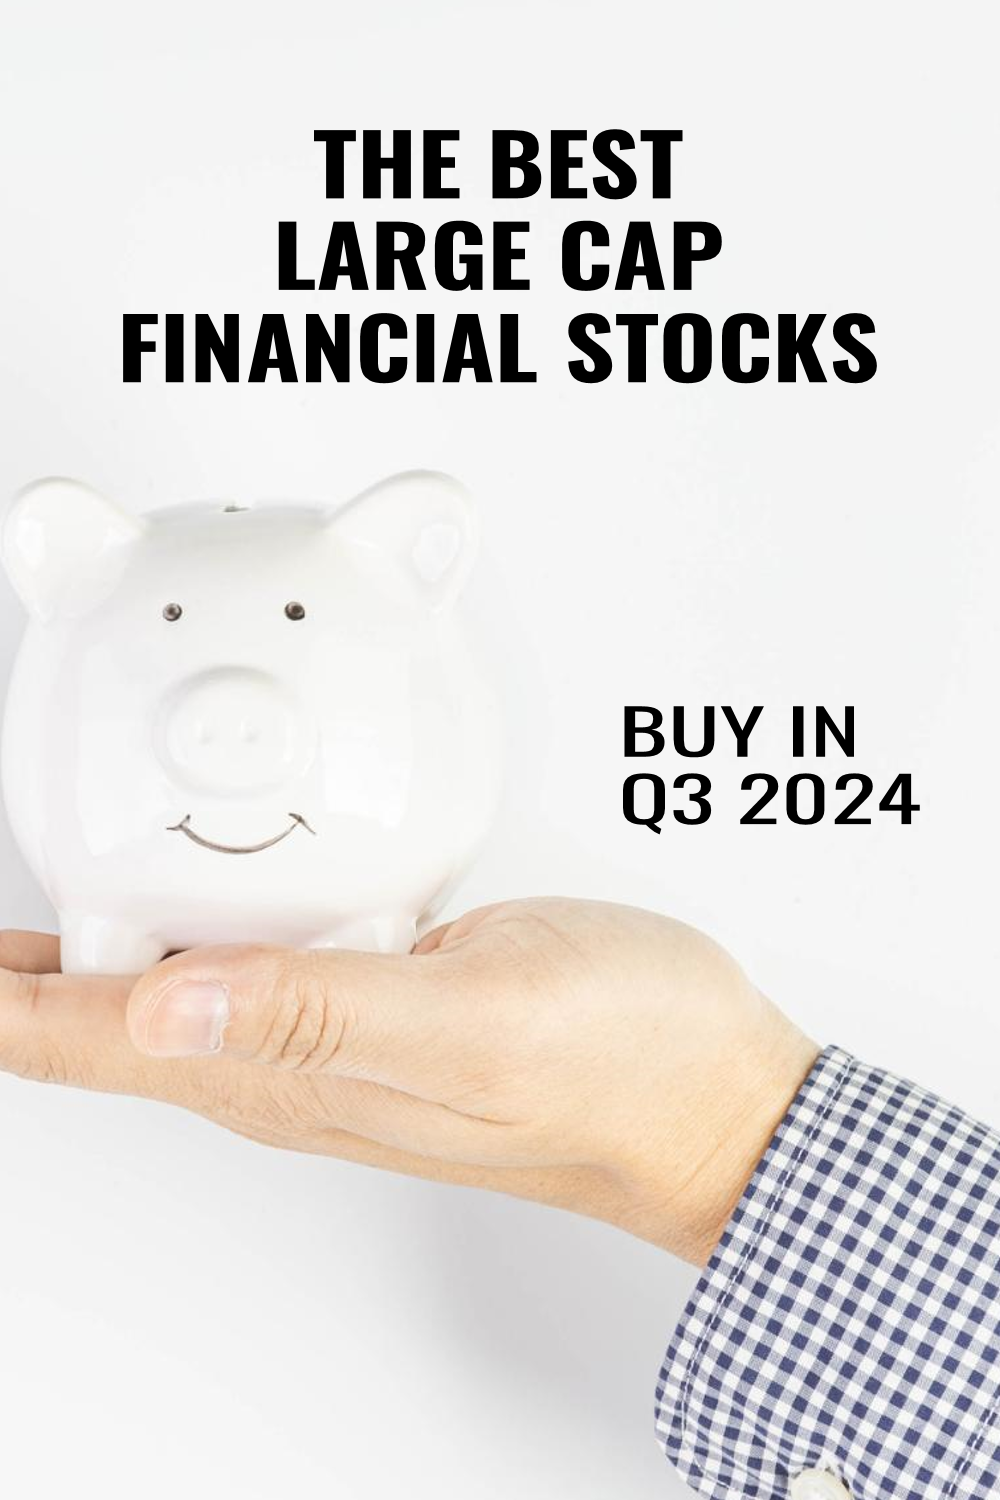 Best large-cap financial stocks to invest in Q3 2024